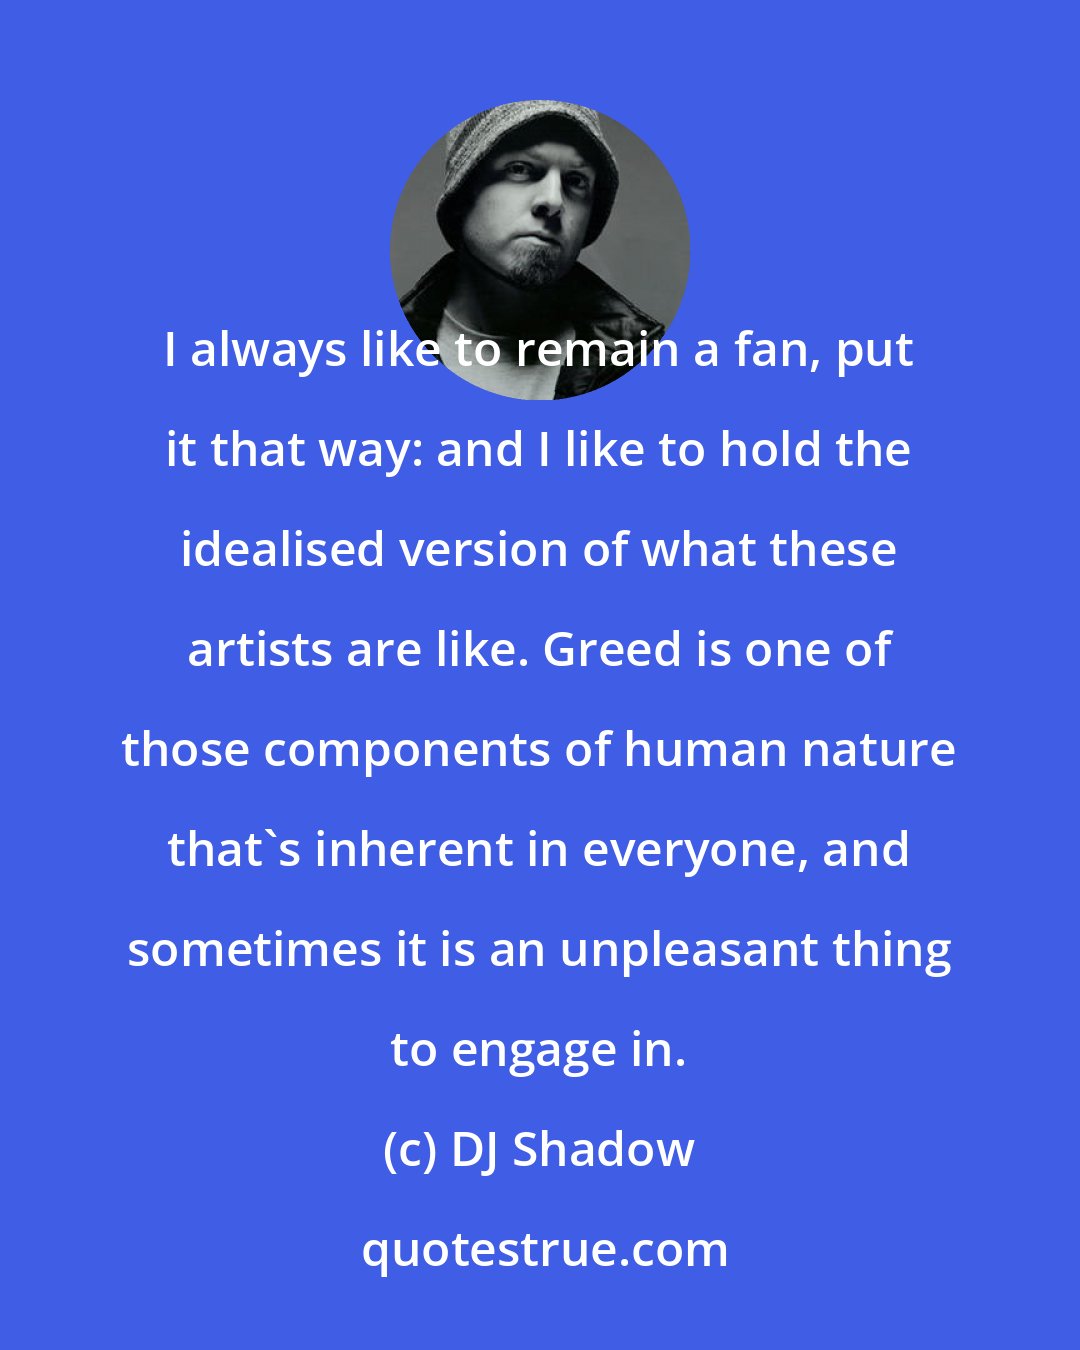 DJ Shadow: I always like to remain a fan, put it that way: and I like to hold the idealised version of what these artists are like. Greed is one of those components of human nature that's inherent in everyone, and sometimes it is an unpleasant thing to engage in.